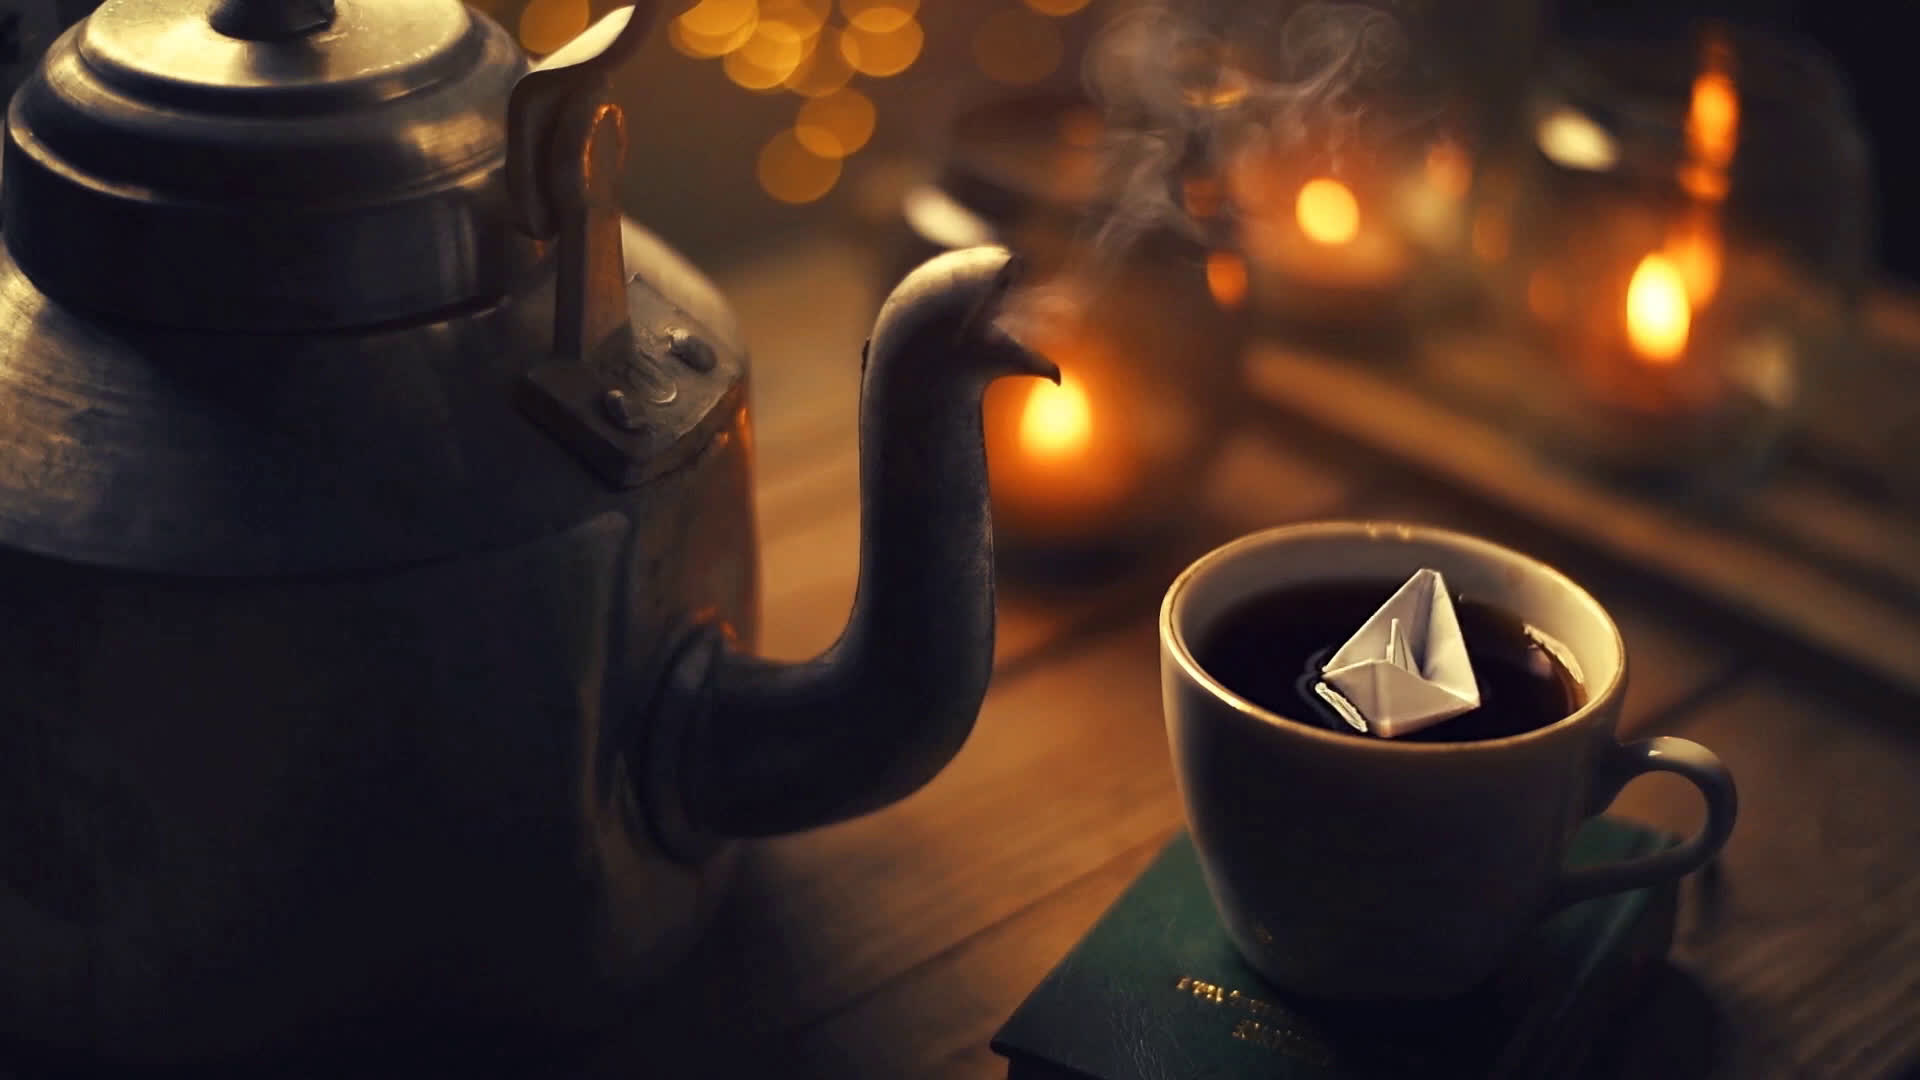 Tea: Breakfast teas, generally a blend of different robust, full-bodied black teas that are often drunk with milk. 1920x1080 Full HD Background.